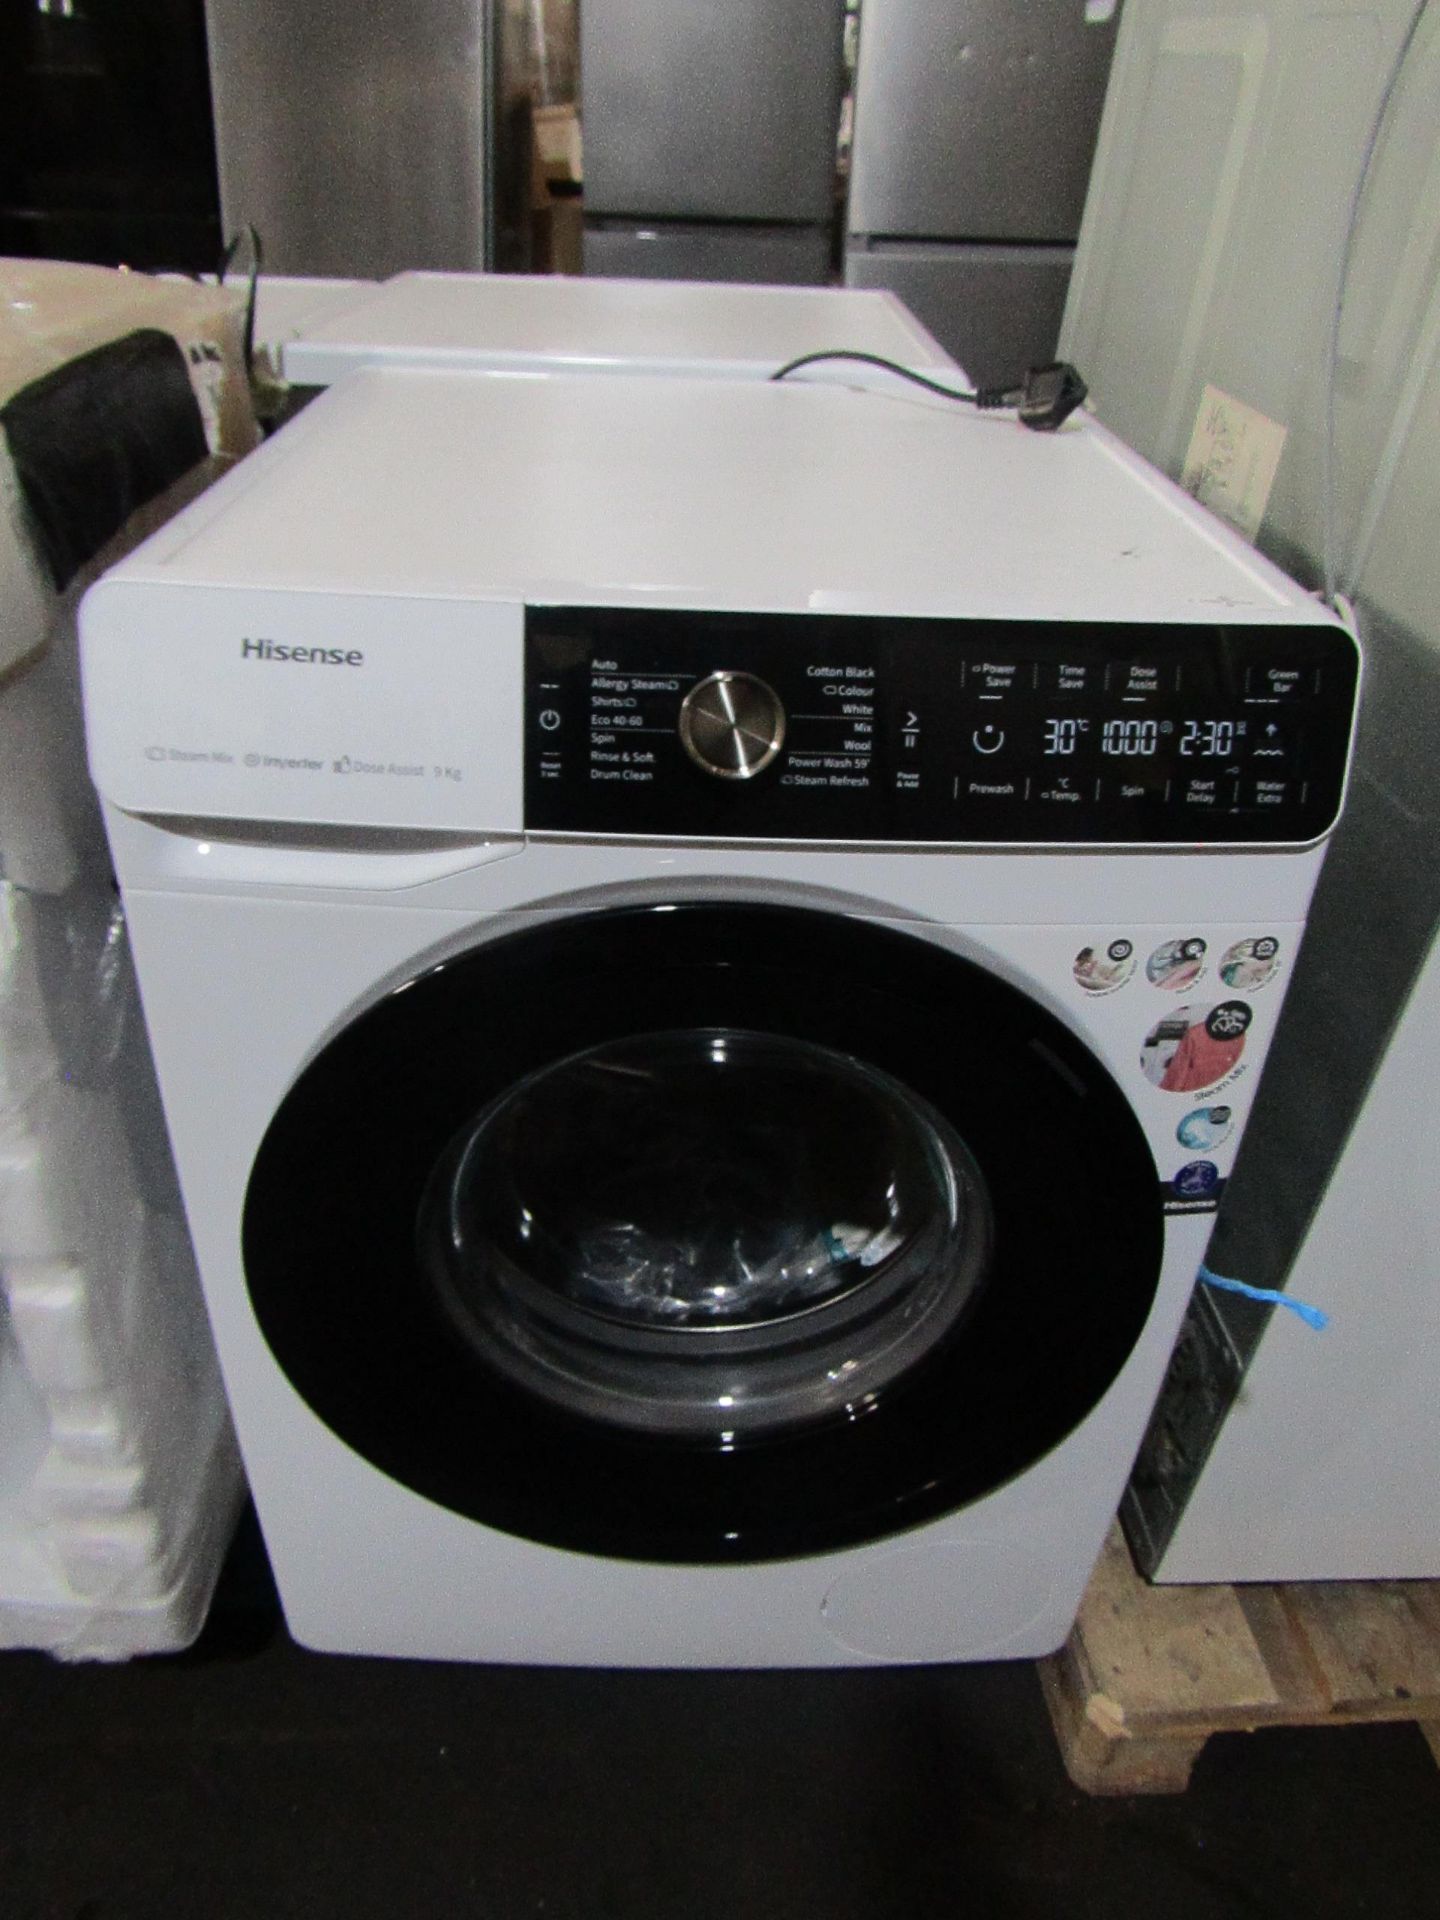 Hisense, Dose Assist washing machine, powers on and spins.